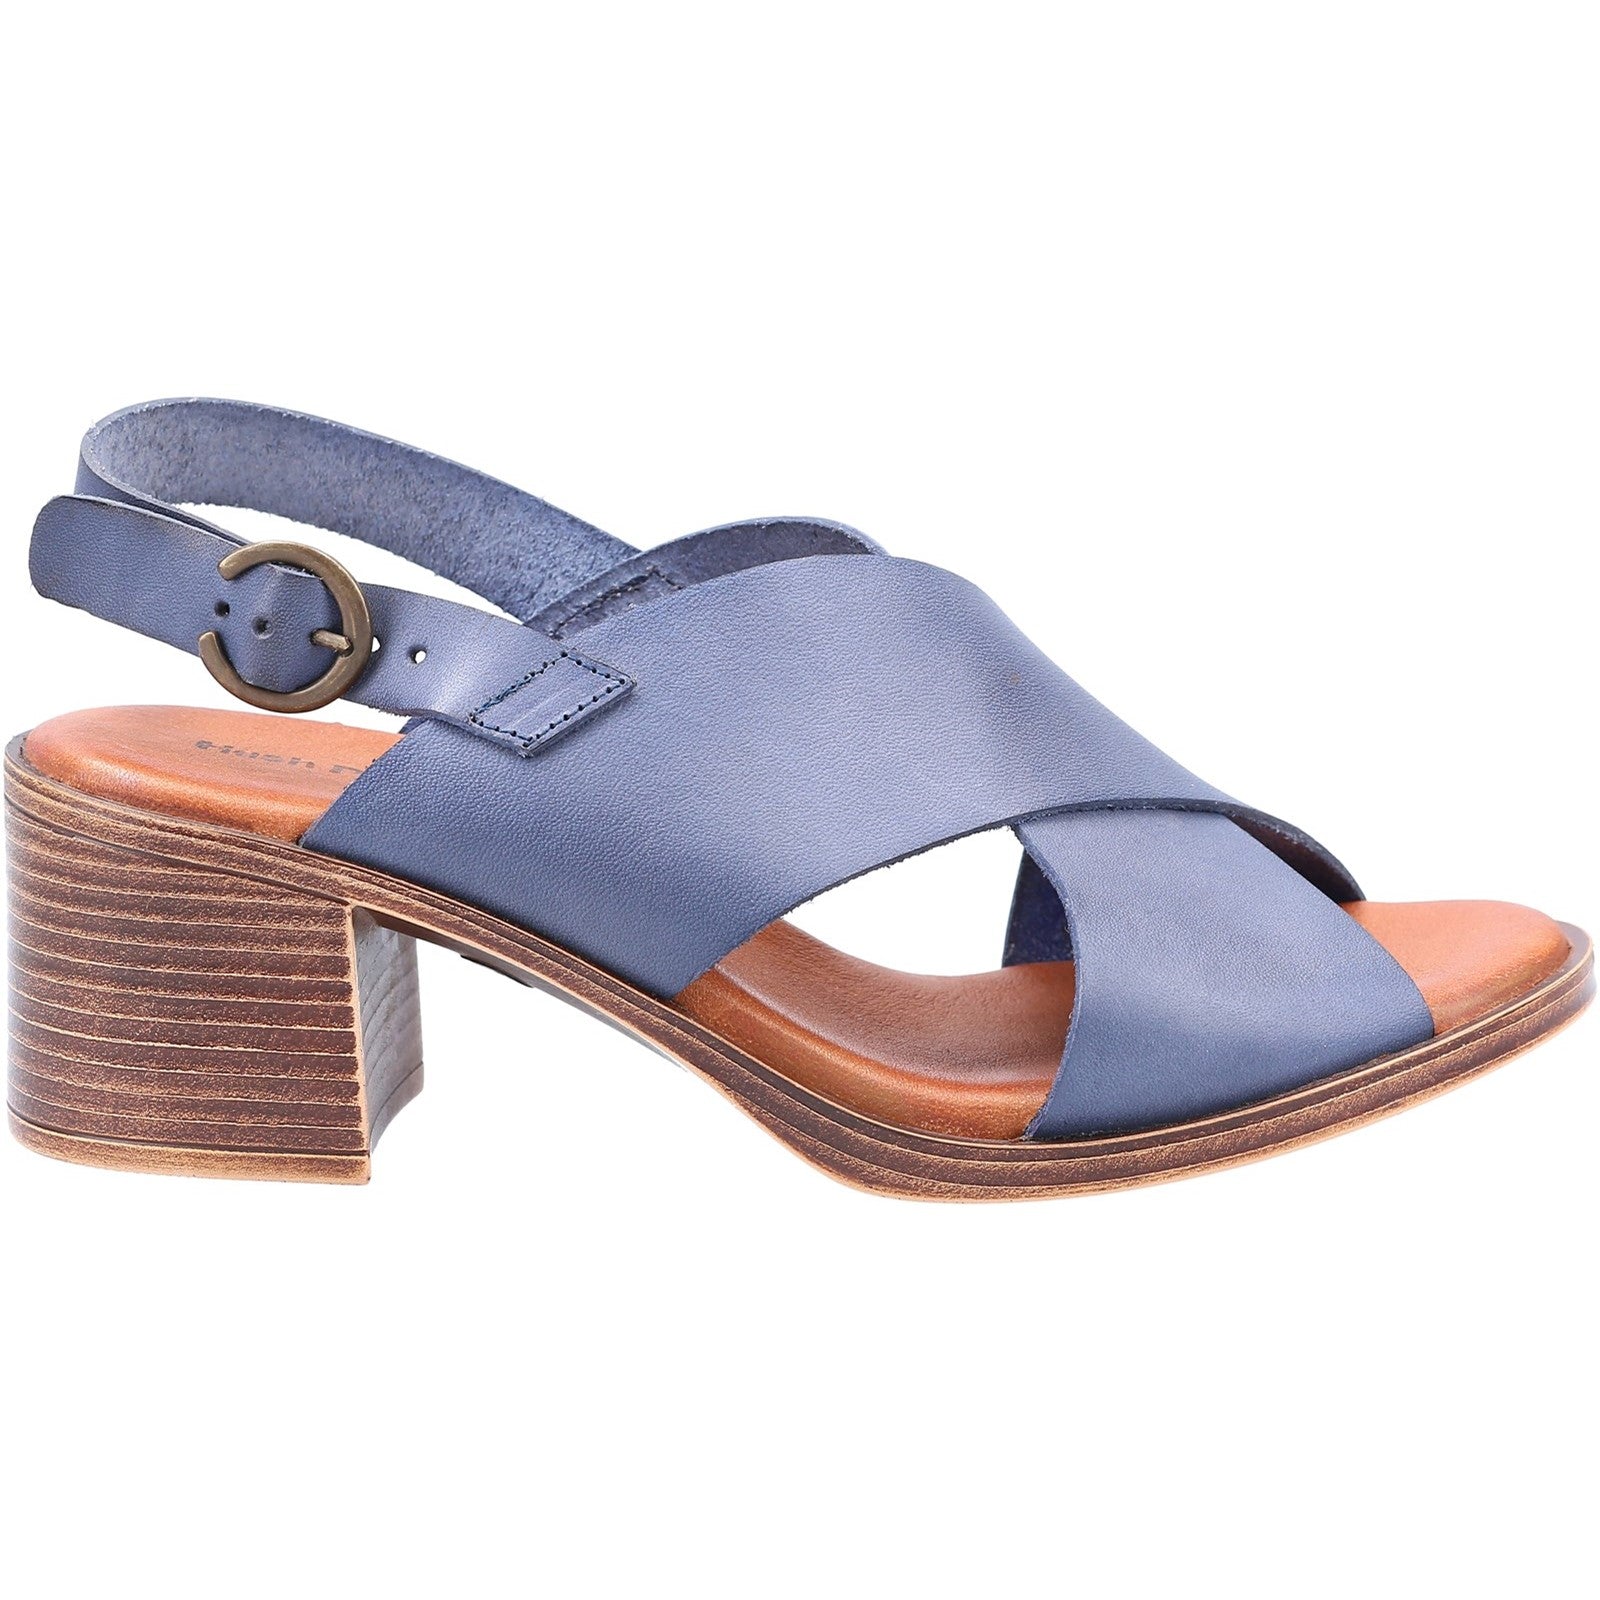 Hush Puppies Womens Gabrielle Leather Sandal - Navy